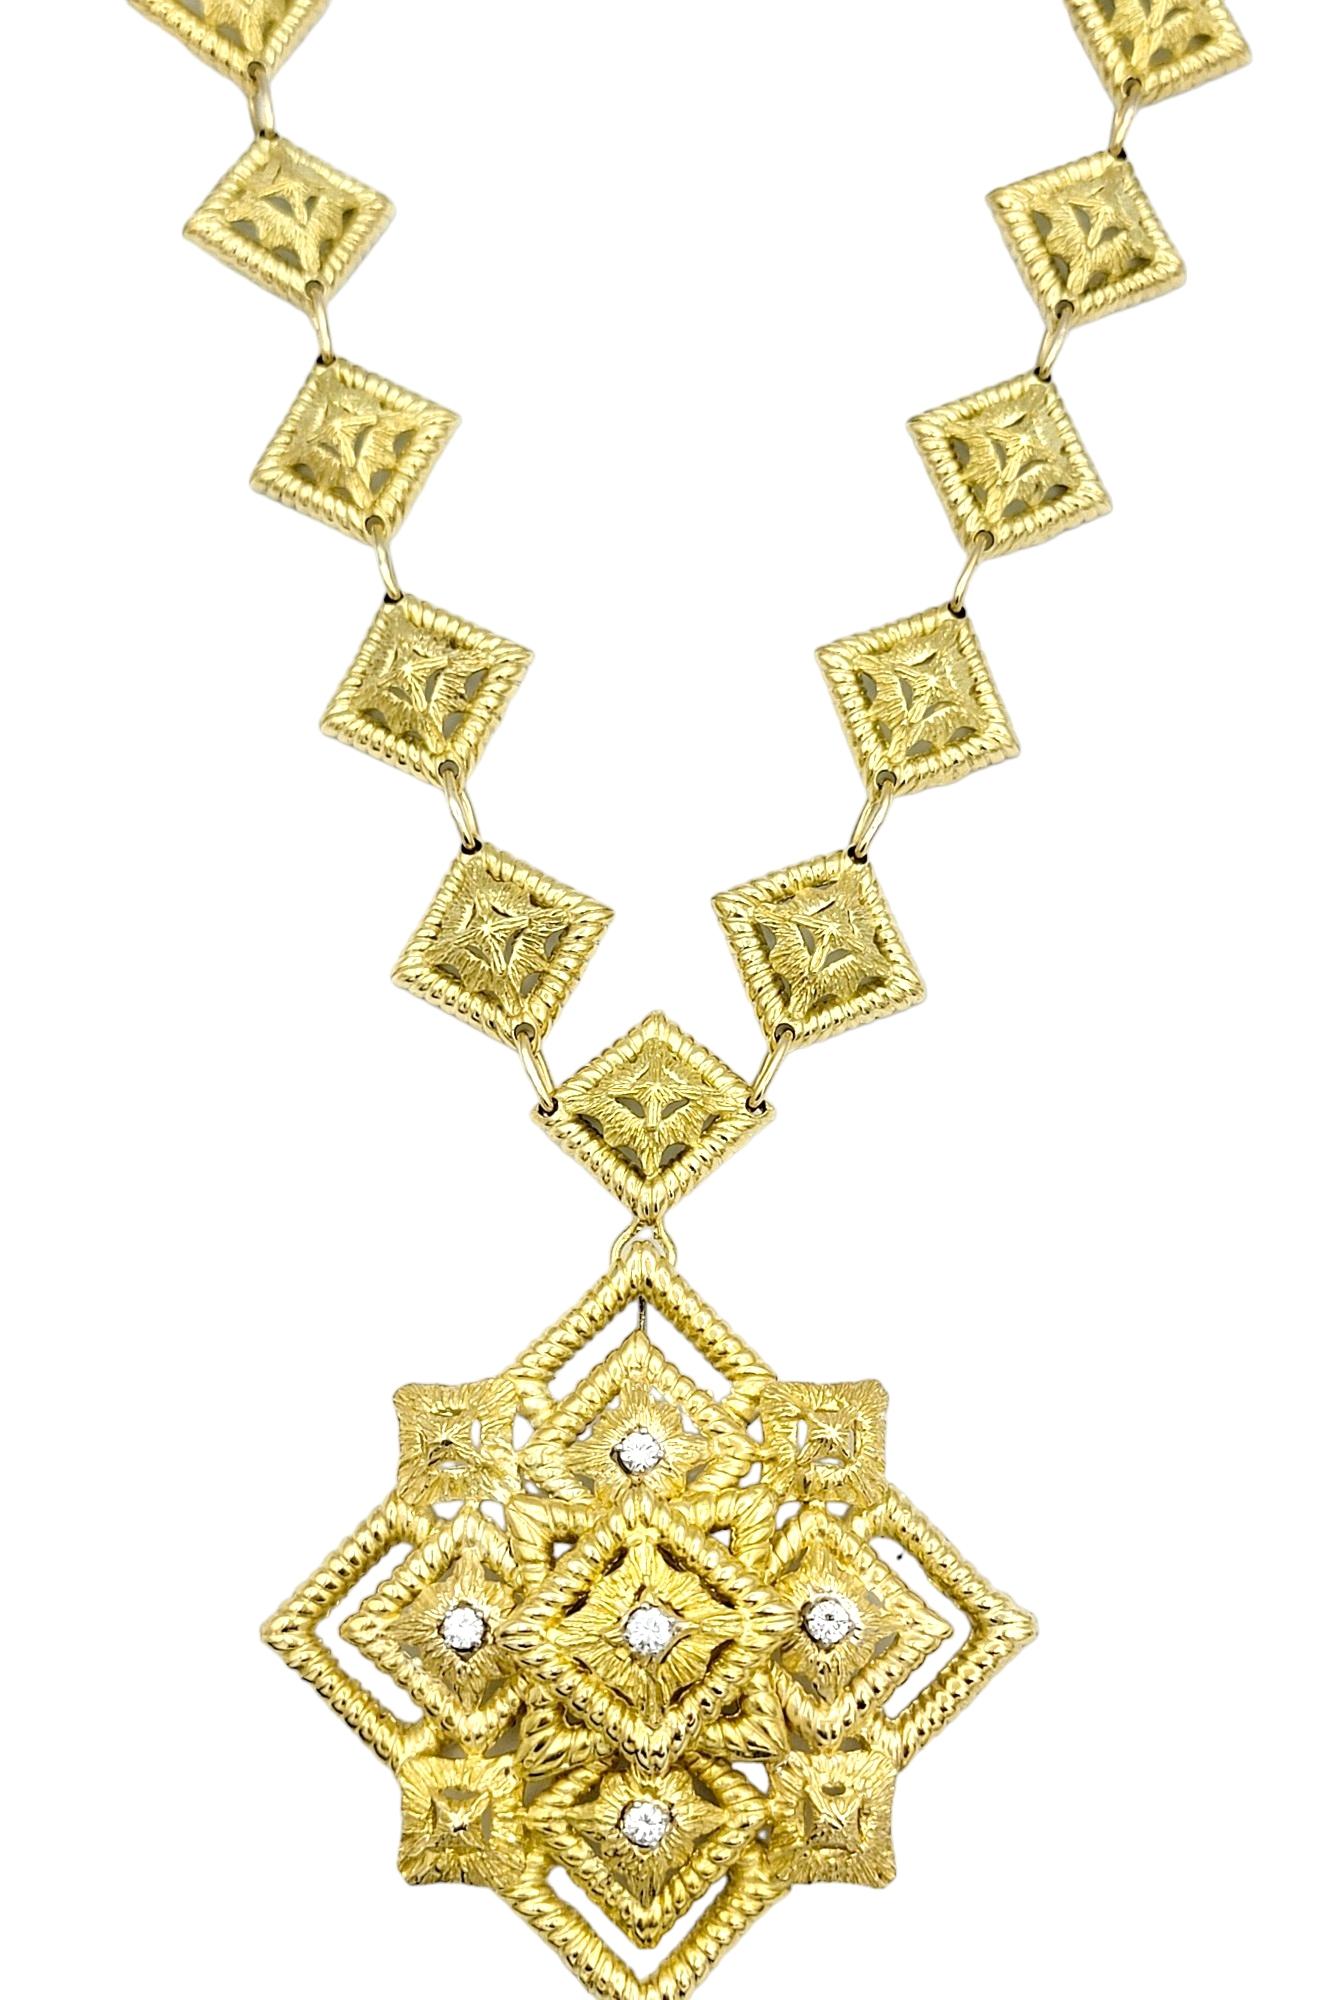 This commanding Hammerman Brothers 18-karat yellow gold necklace is an opulent statement piece that exudes magnificence and sophistication. The focal point of this extraordinary pendant necklace is a large, intricately detailed square pendant that